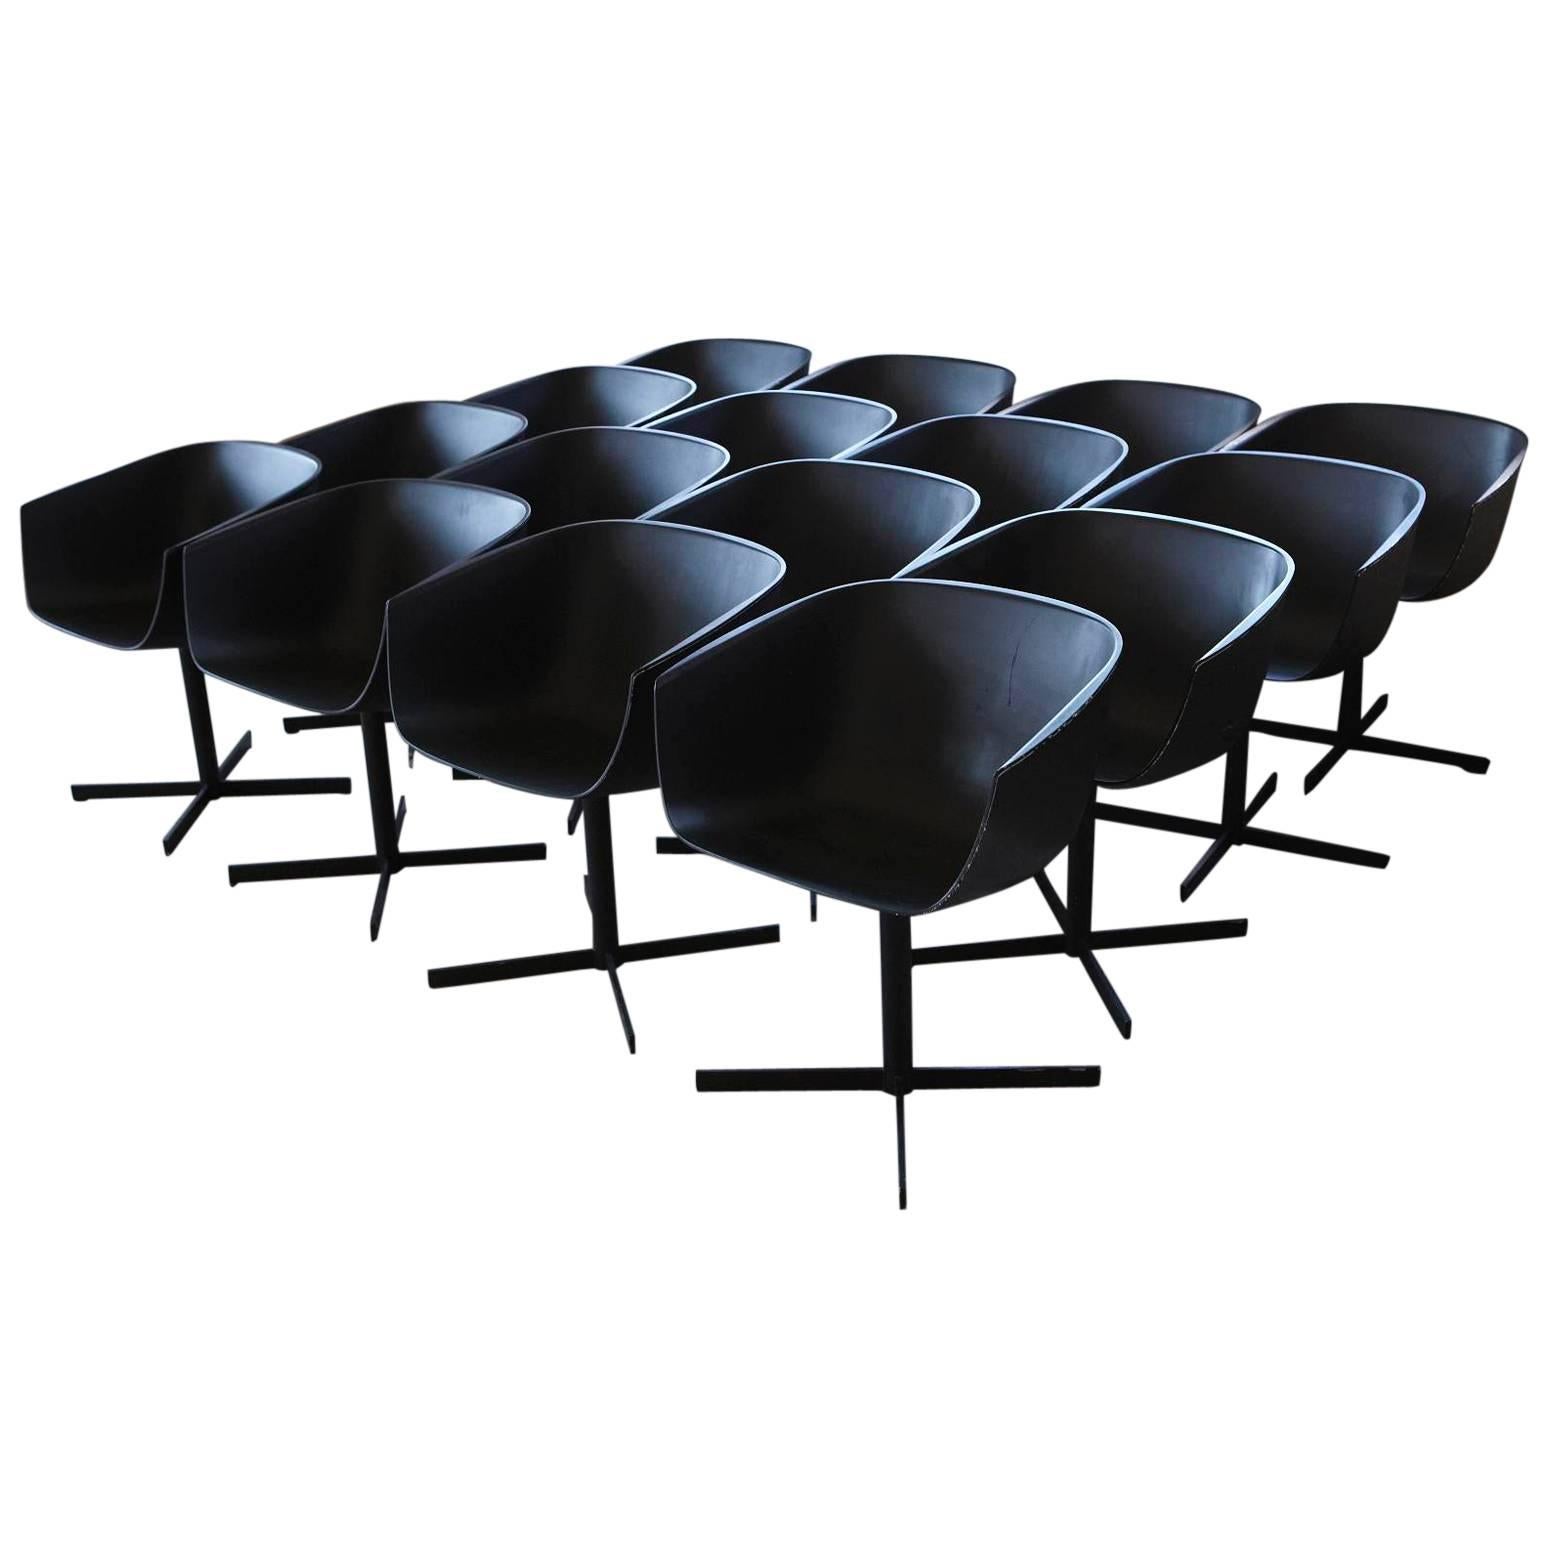 "Strip" Dining Chairs by Carlo Colombo for Poliform - sold in even numbers